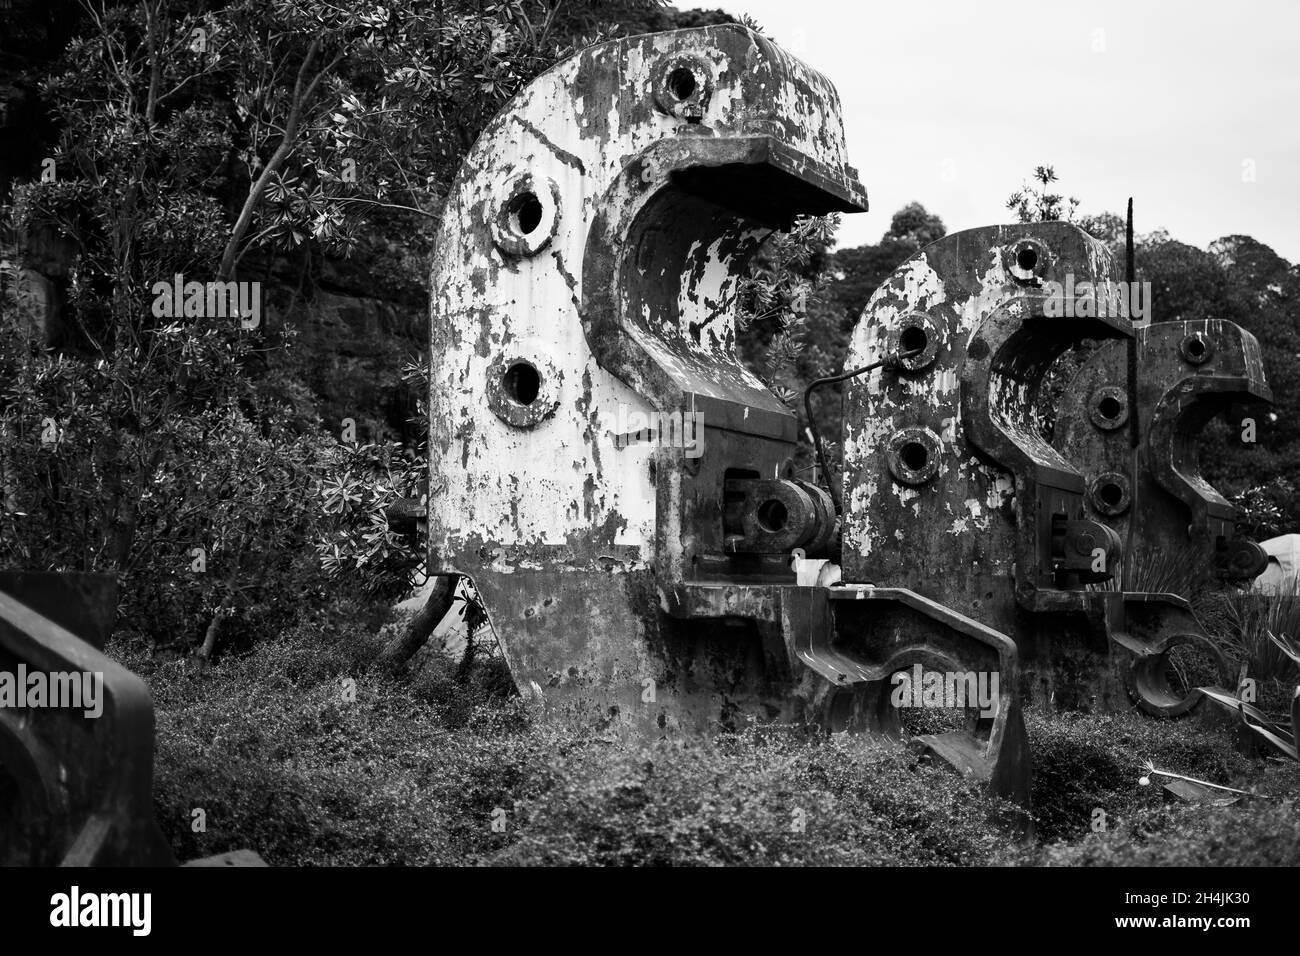 Grayscale shot of the old rusty industrial equipment. Stock Photo